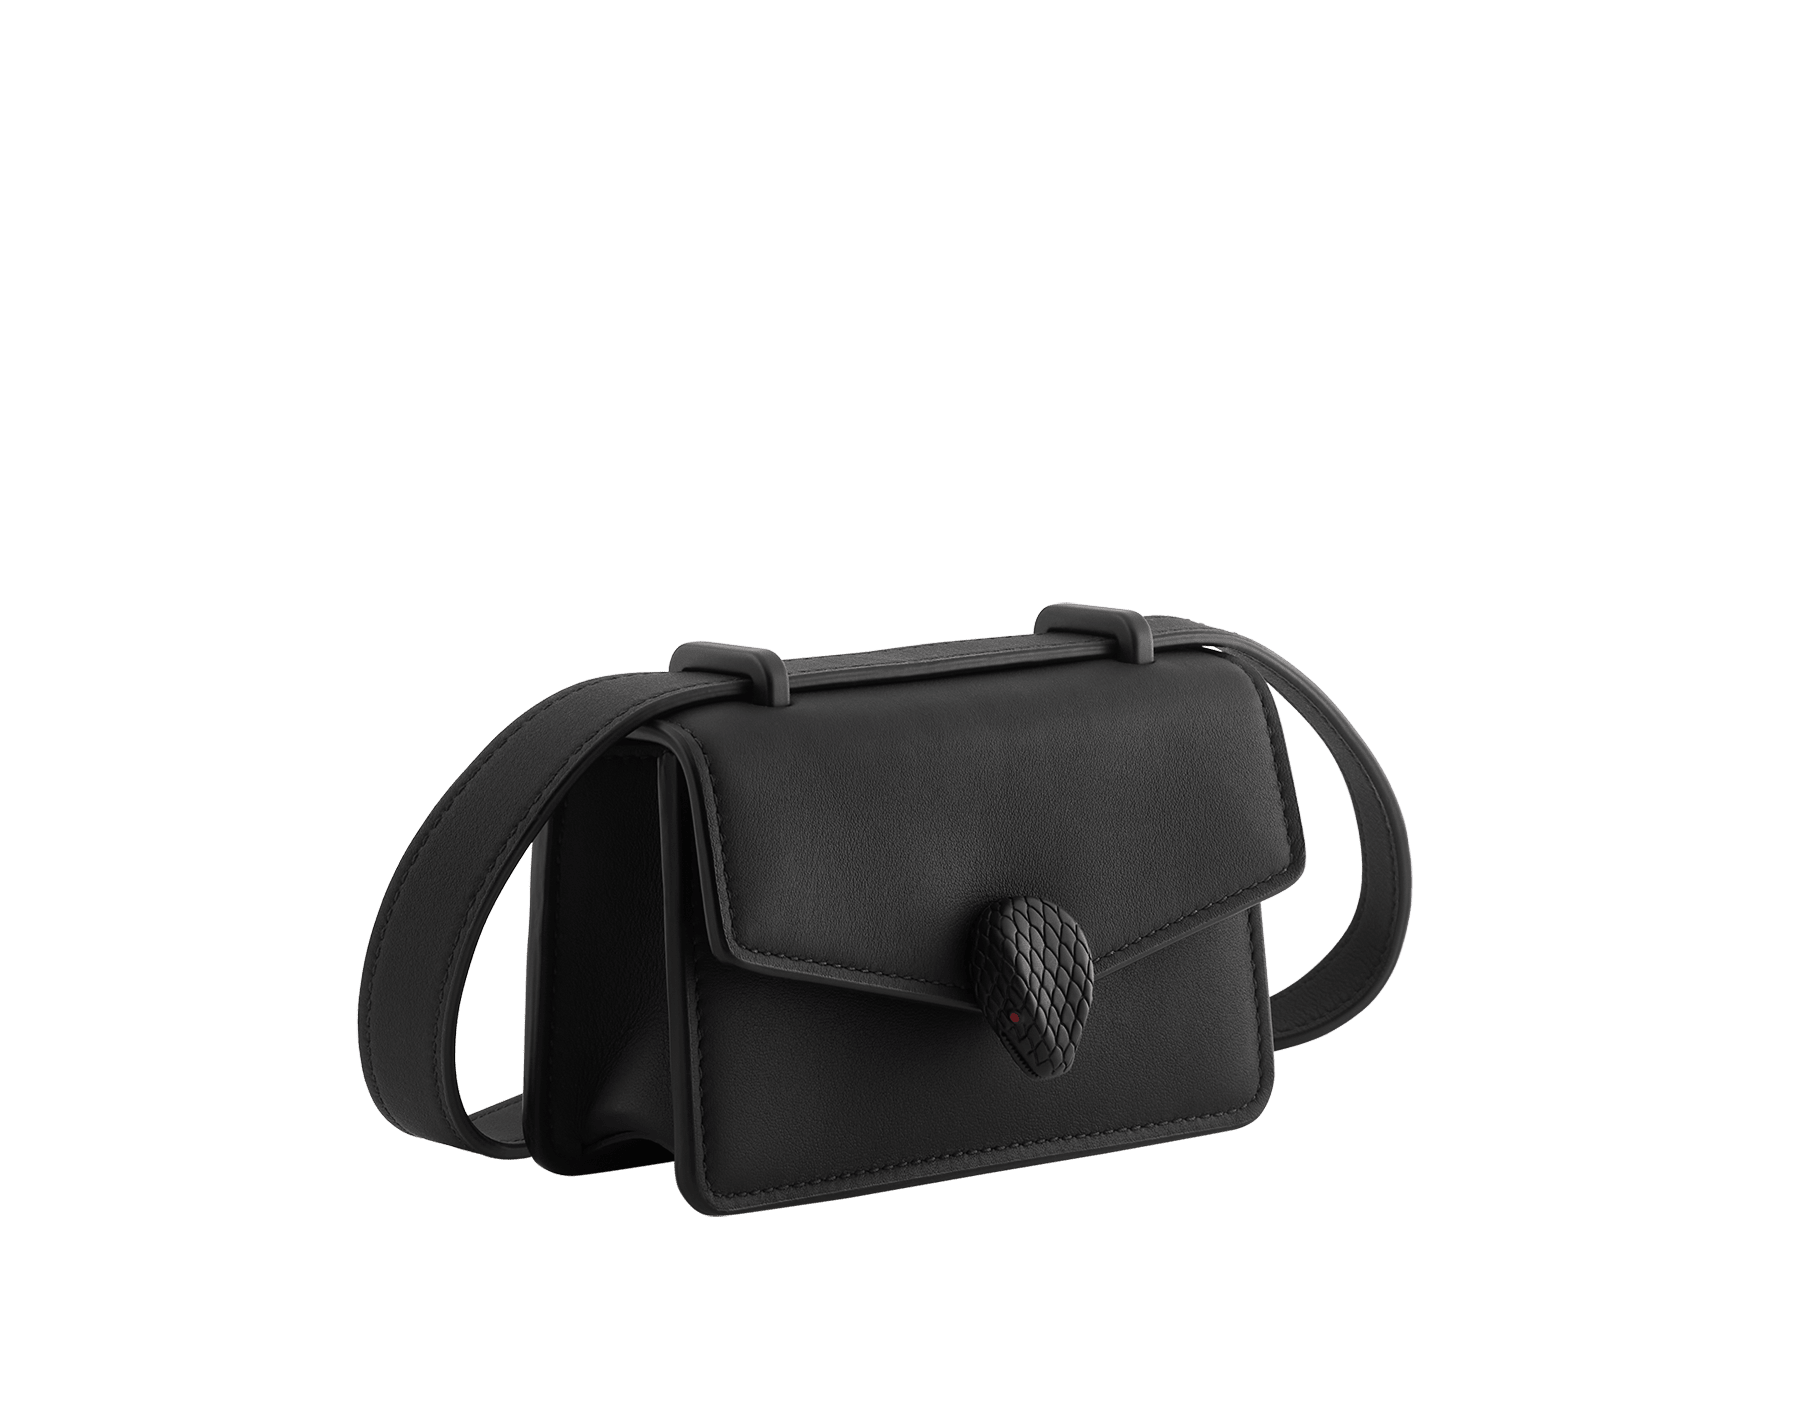 Serpenti Forever unisex micro bag in matte black calf leather with black nappa leather lining. Captivating snakehead closure in dark ruthenium-plated brass enamelled in matte black and embellished with red enamel eyes. 292015 image 1